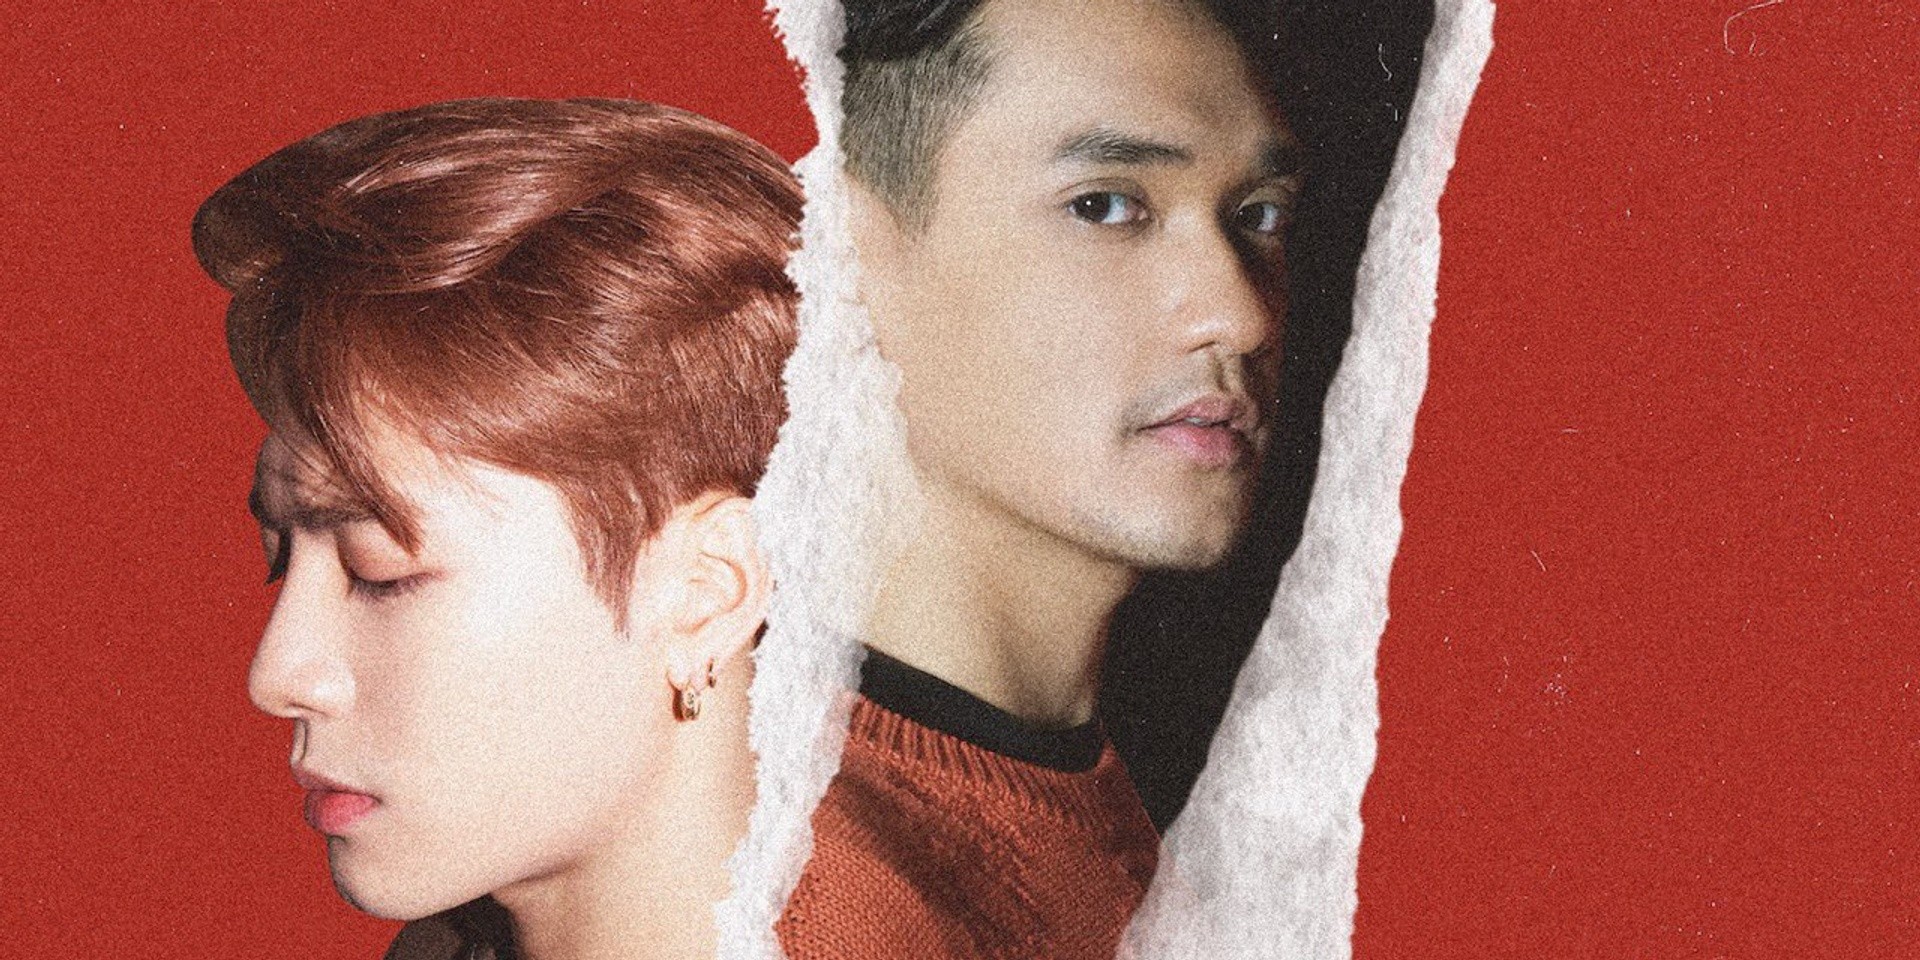 GOT7's Jackson Wang teams up with Afgan for new single, 'M.I.A' – listen